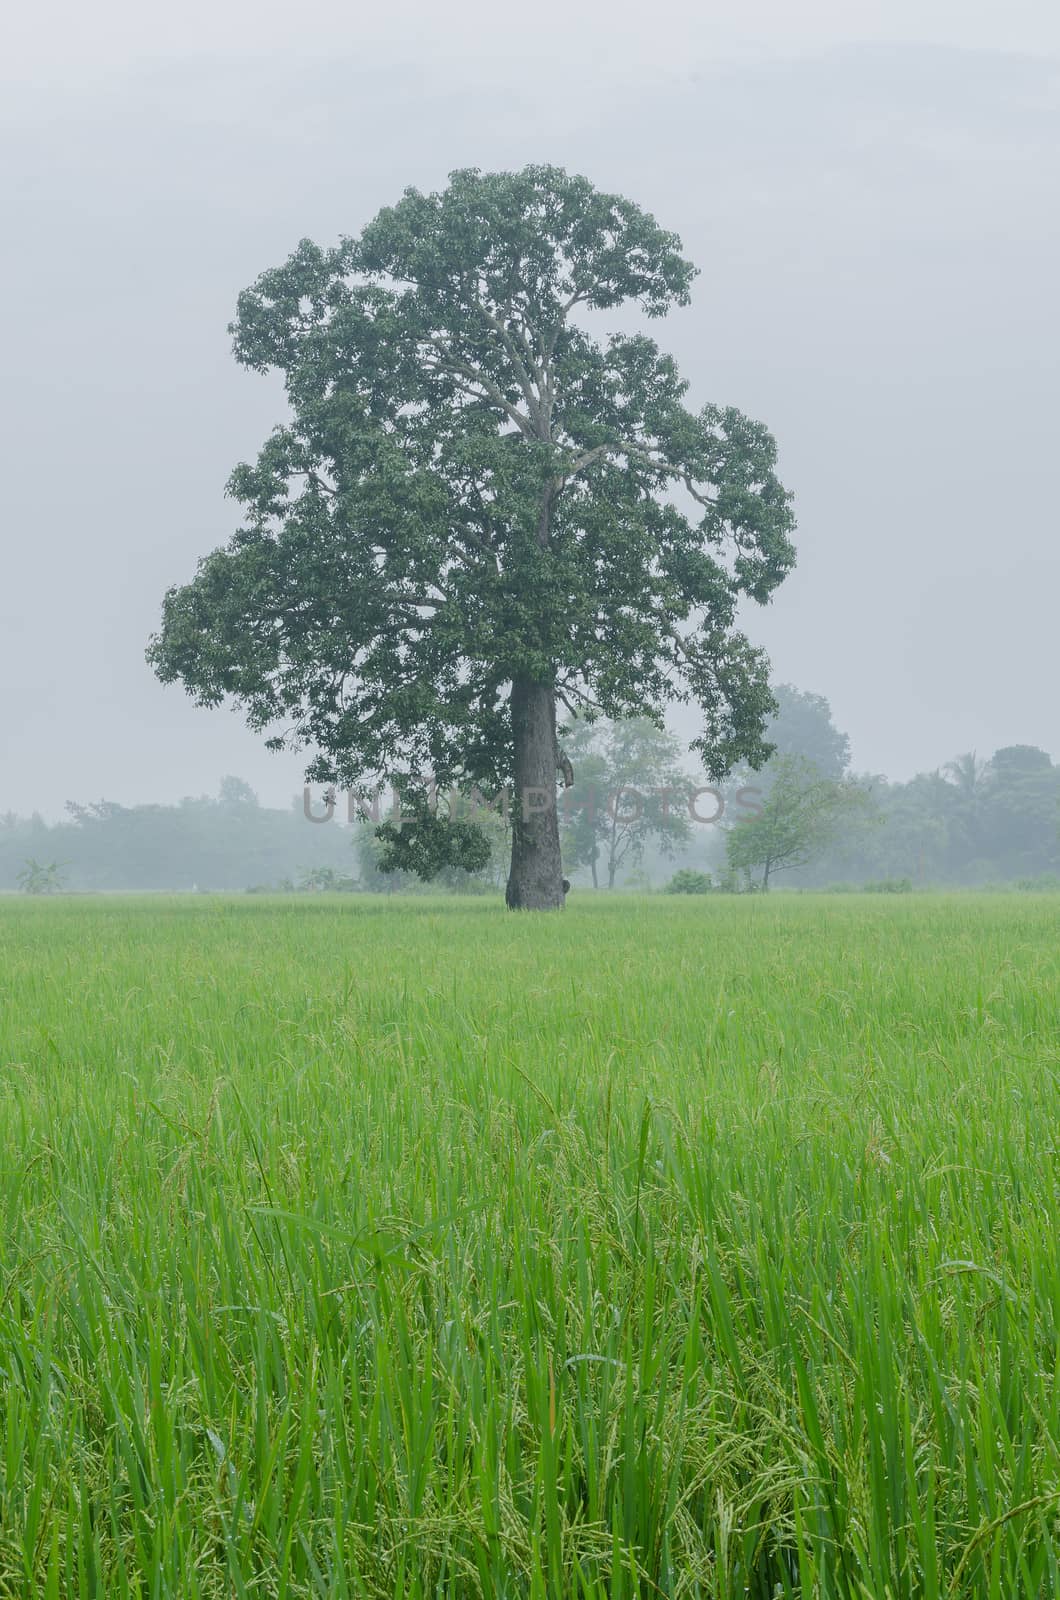 Large mango tree in the rice field after rain in the evening